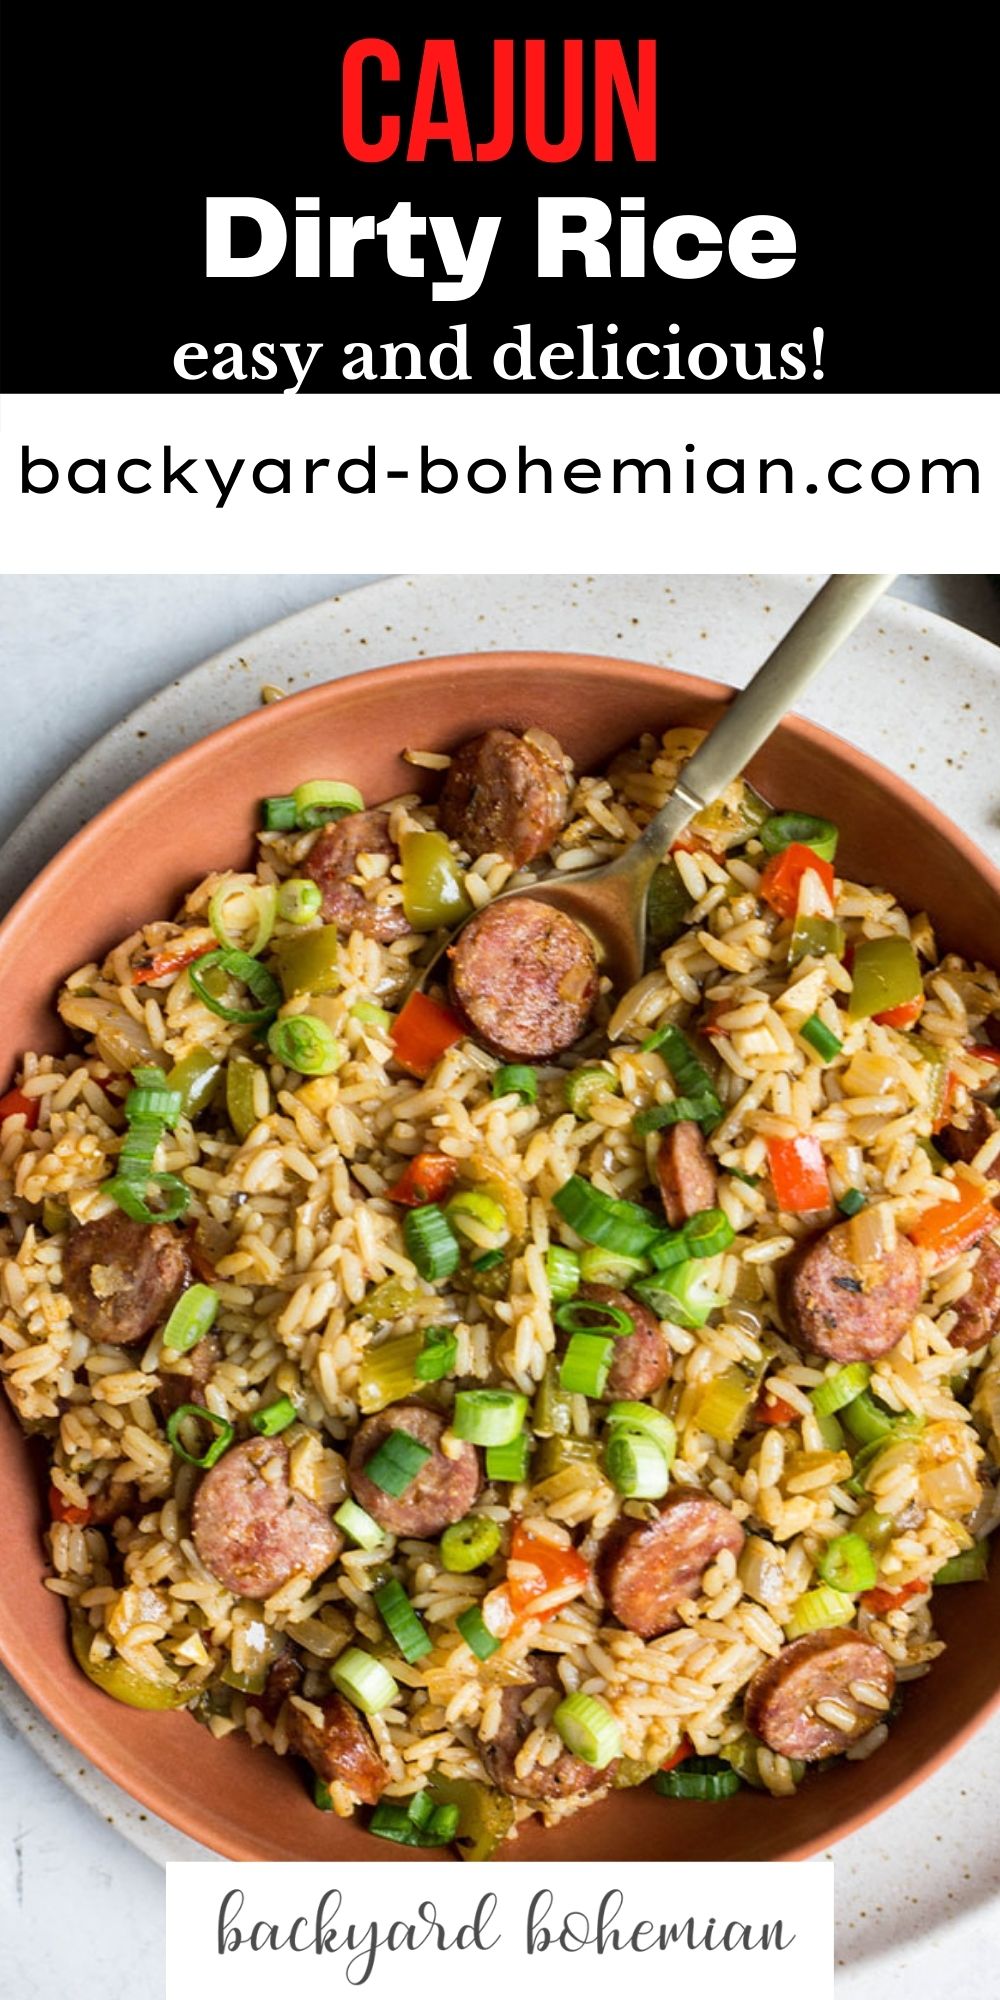 New Orleans Cajun Dirty Rice is made with Cajun sausage, white rice, bell peppers and features a spicy seasoning blend. This traditional Cajun rice dish is hearty, easy to make, and inexpensive! via @foodhussy